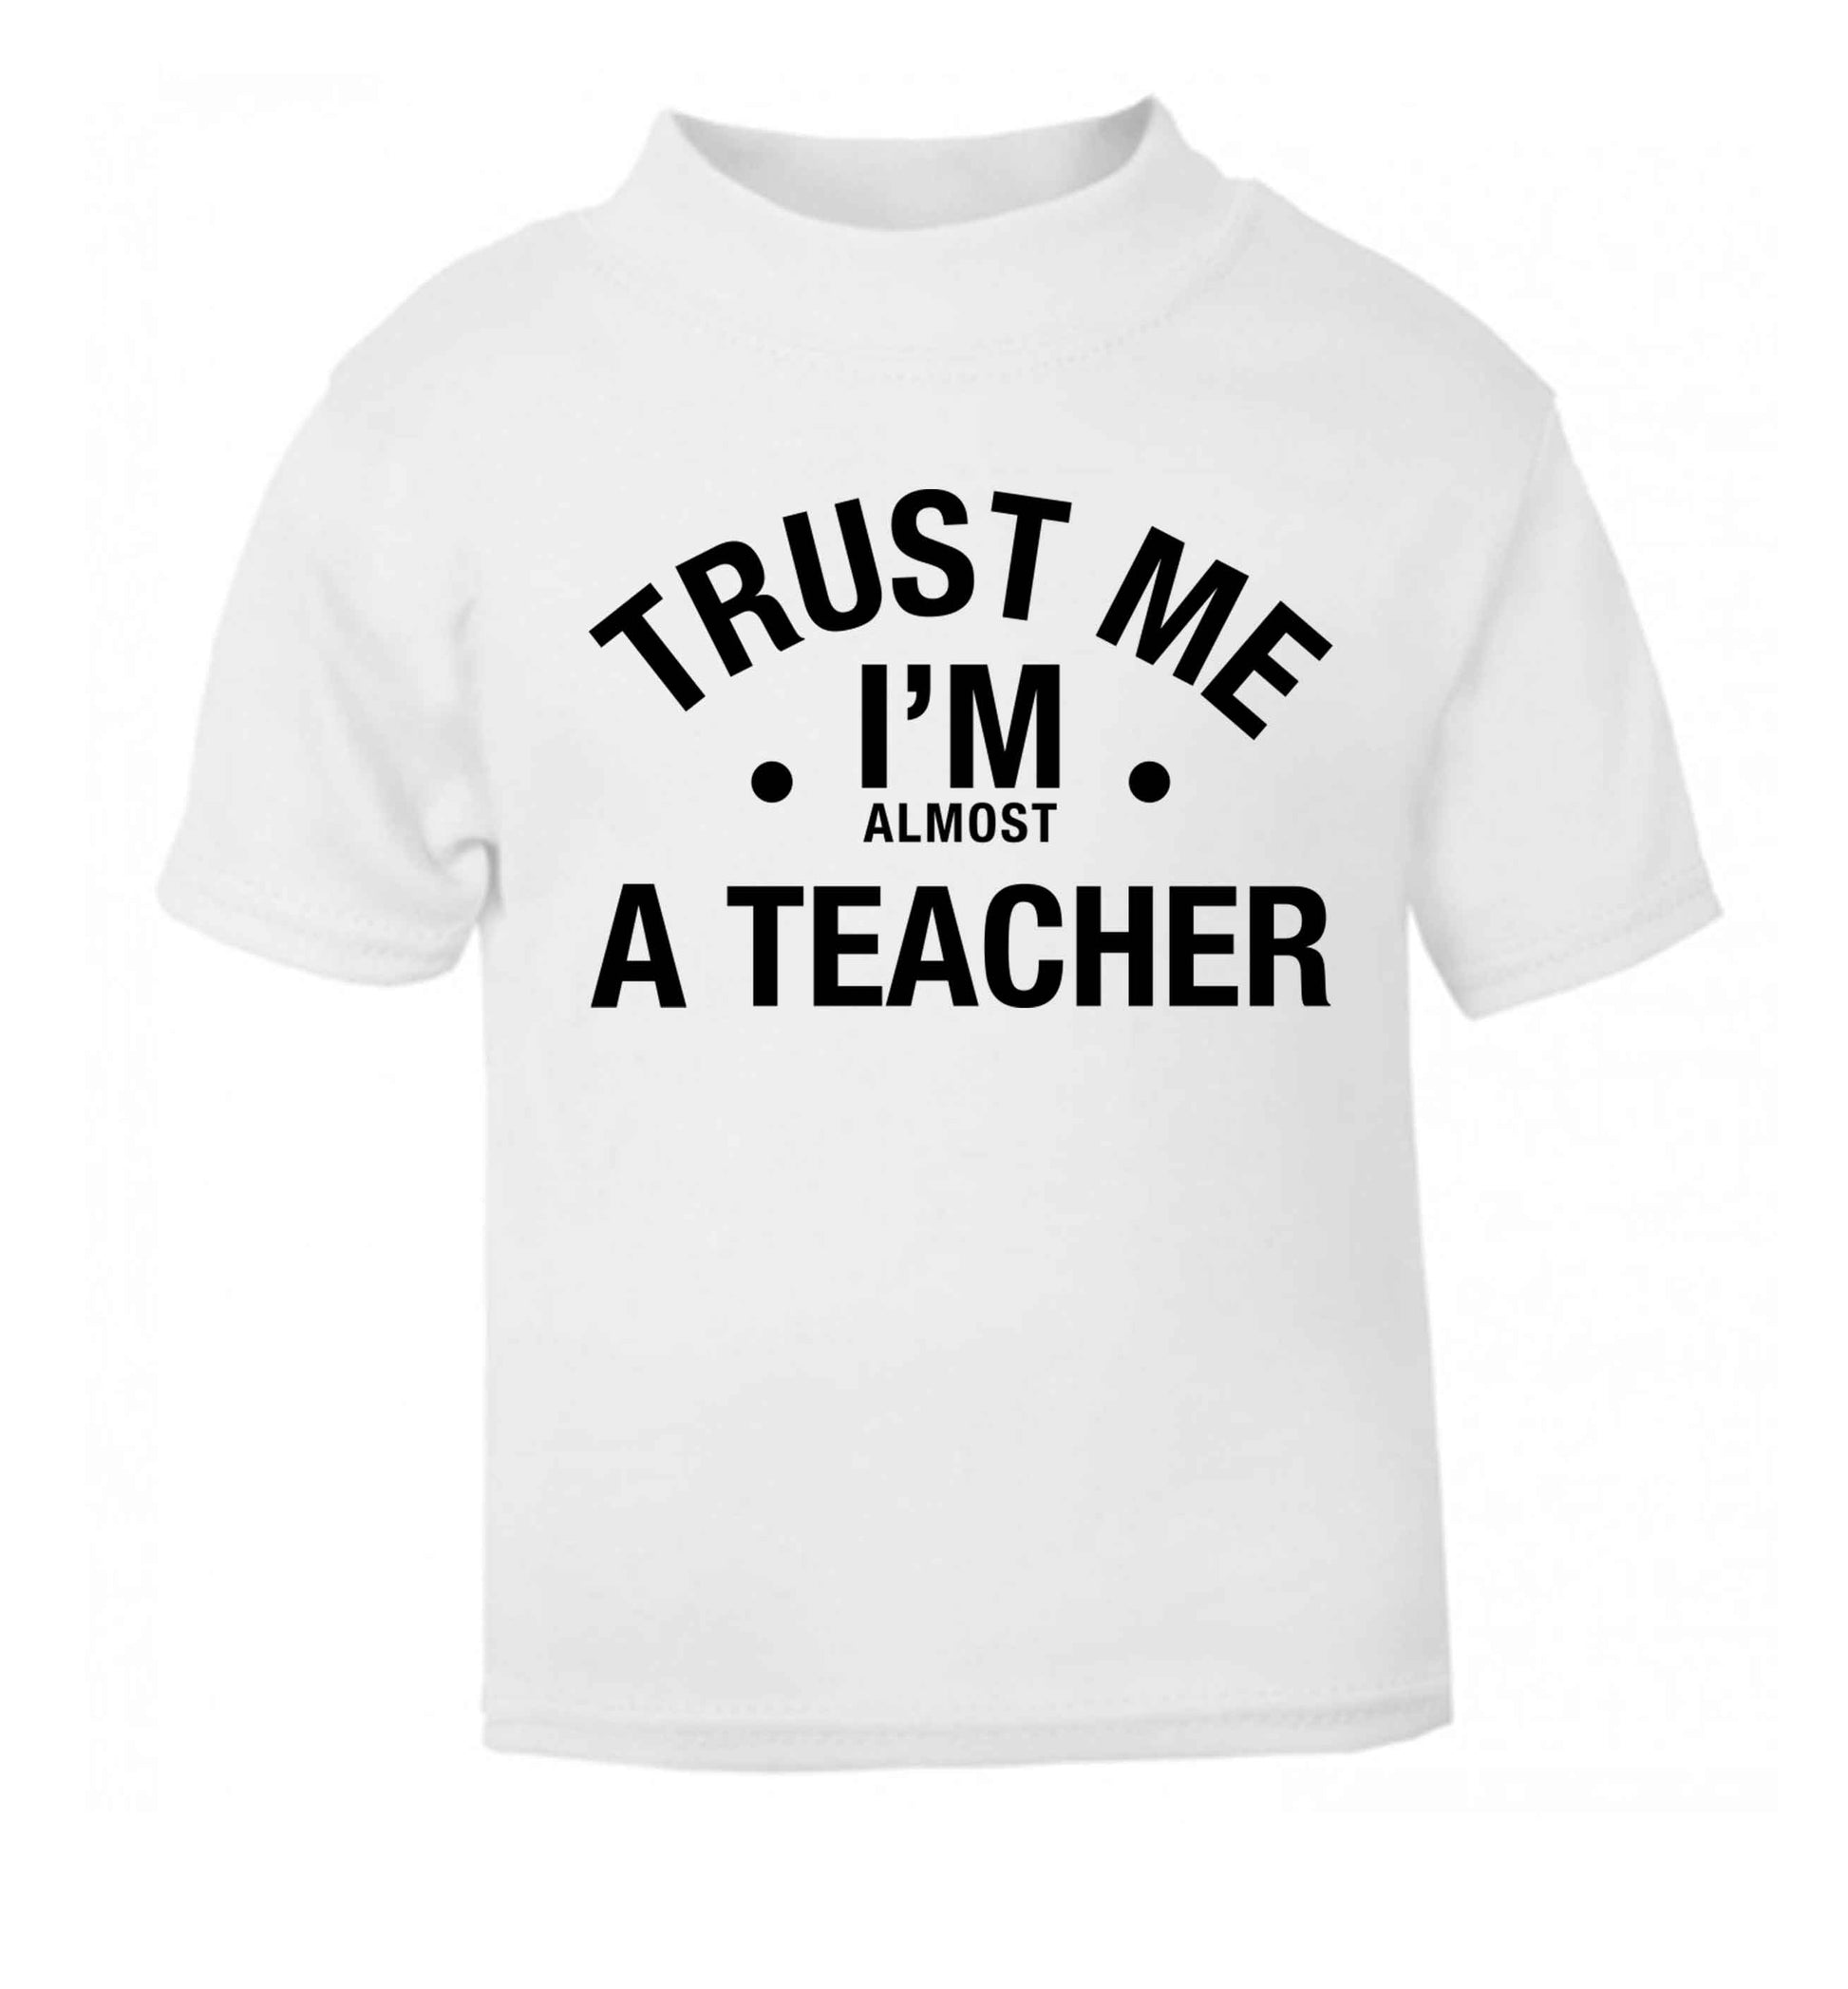 Trust me I'm almost a teacher white baby toddler Tshirt 2 Years